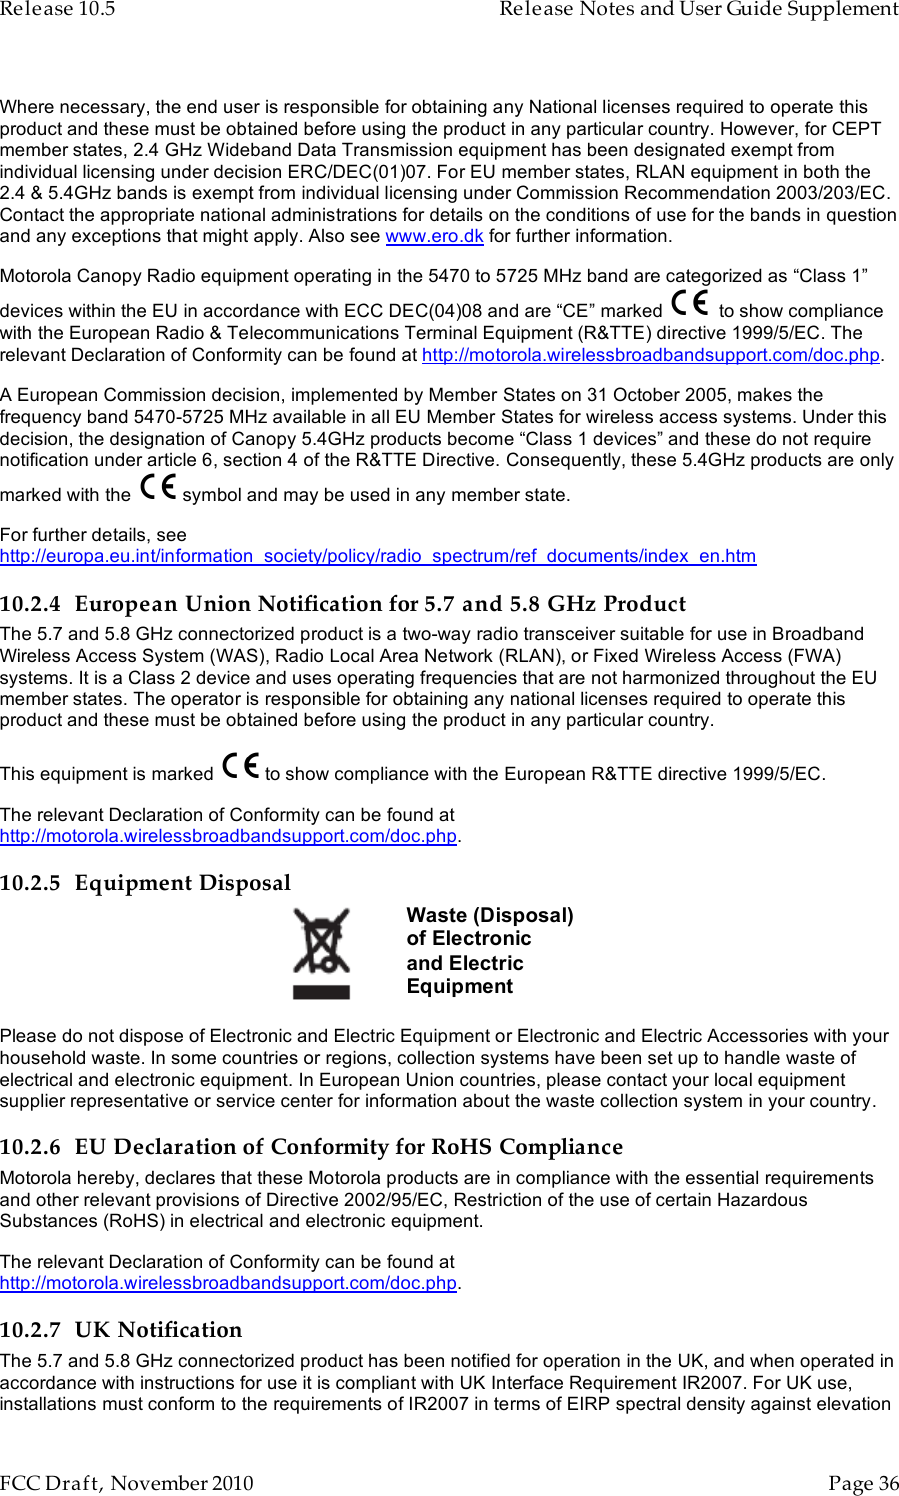 Release 10.5    Release Notes and User Guide Supplement      FCC Draft, November 2010  Page 36   Where necessary, the end user is responsible for obtaining any National licenses required to operate this product and these must be obtained before using the product in any particular country. However, for CEPT member states, 2.4 GHz Wideband Data Transmission equipment has been designated exempt from individual licensing under decision ERC/DEC(01)07. For EU member states, RLAN equipment in both the 2.4 &amp; 5.4GHz bands is exempt from individual licensing under Commission Recommendation 2003/203/EC. Contact the appropriate national administrations for details on the conditions of use for the bands in question and any exceptions that might apply. Also see www.ero.dk for further information.  Motorola Canopy Radio equipment operating in the 5470 to 5725 MHz band are categorized as “Class 1” devices within the EU in accordance with ECC DEC(04)08 and are “CE” marked    to show compliance with the European Radio &amp; Telecommunications Terminal Equipment (R&amp;TTE) directive 1999/5/EC. The relevant Declaration of Conformity can be found at http://motorola.wirelessbroadbandsupport.com/doc.php. A European Commission decision, implemented by Member States on 31 October 2005, makes the frequency band 5470-5725 MHz available in all EU Member States for wireless access systems. Under this decision, the designation of Canopy 5.4GHz products become “Class 1 devices” and these do not require notification under article 6, section 4 of the R&amp;TTE Directive. Consequently, these 5.4GHz products are only marked with the   symbol and may be used in any member state.  For further details, see http://europa.eu.int/information_society/policy/radio_spectrum/ref_documents/index_en.htm 10.2.4 European Union Notification for 5.7 and 5.8 GHz Product The 5.7 and 5.8 GHz connectorized product is a two-way radio transceiver suitable for use in Broadband Wireless Access System (WAS), Radio Local Area Network (RLAN), or Fixed Wireless Access (FWA) systems. It is a Class 2 device and uses operating frequencies that are not harmonized throughout the EU member states. The operator is responsible for obtaining any national licenses required to operate this product and these must be obtained before using the product in any particular country. This equipment is marked   to show compliance with the European R&amp;TTE directive 1999/5/EC. The relevant Declaration of Conformity can be found at http://motorola.wirelessbroadbandsupport.com/doc.php. 10.2.5 Equipment Disposal  Waste (Disposal) of Electronic and Electric Equipment Please do not dispose of Electronic and Electric Equipment or Electronic and Electric Accessories with your household waste. In some countries or regions, collection systems have been set up to handle waste of electrical and electronic equipment. In European Union countries, please contact your local equipment supplier representative or service center for information about the waste collection system in your country. 10.2.6 EU Declaration of Conformity for RoHS Compliance Motorola hereby, declares that these Motorola products are in compliance with the essential requirements and other relevant provisions of Directive 2002/95/EC, Restriction of the use of certain Hazardous Substances (RoHS) in electrical and electronic equipment. The relevant Declaration of Conformity can be found at http://motorola.wirelessbroadbandsupport.com/doc.php. 10.2.7 UK Notification The 5.7 and 5.8 GHz connectorized product has been notified for operation in the UK, and when operated in accordance with instructions for use it is compliant with UK Interface Requirement IR2007. For UK use, installations must conform to the requirements of IR2007 in terms of EIRP spectral density against elevation 